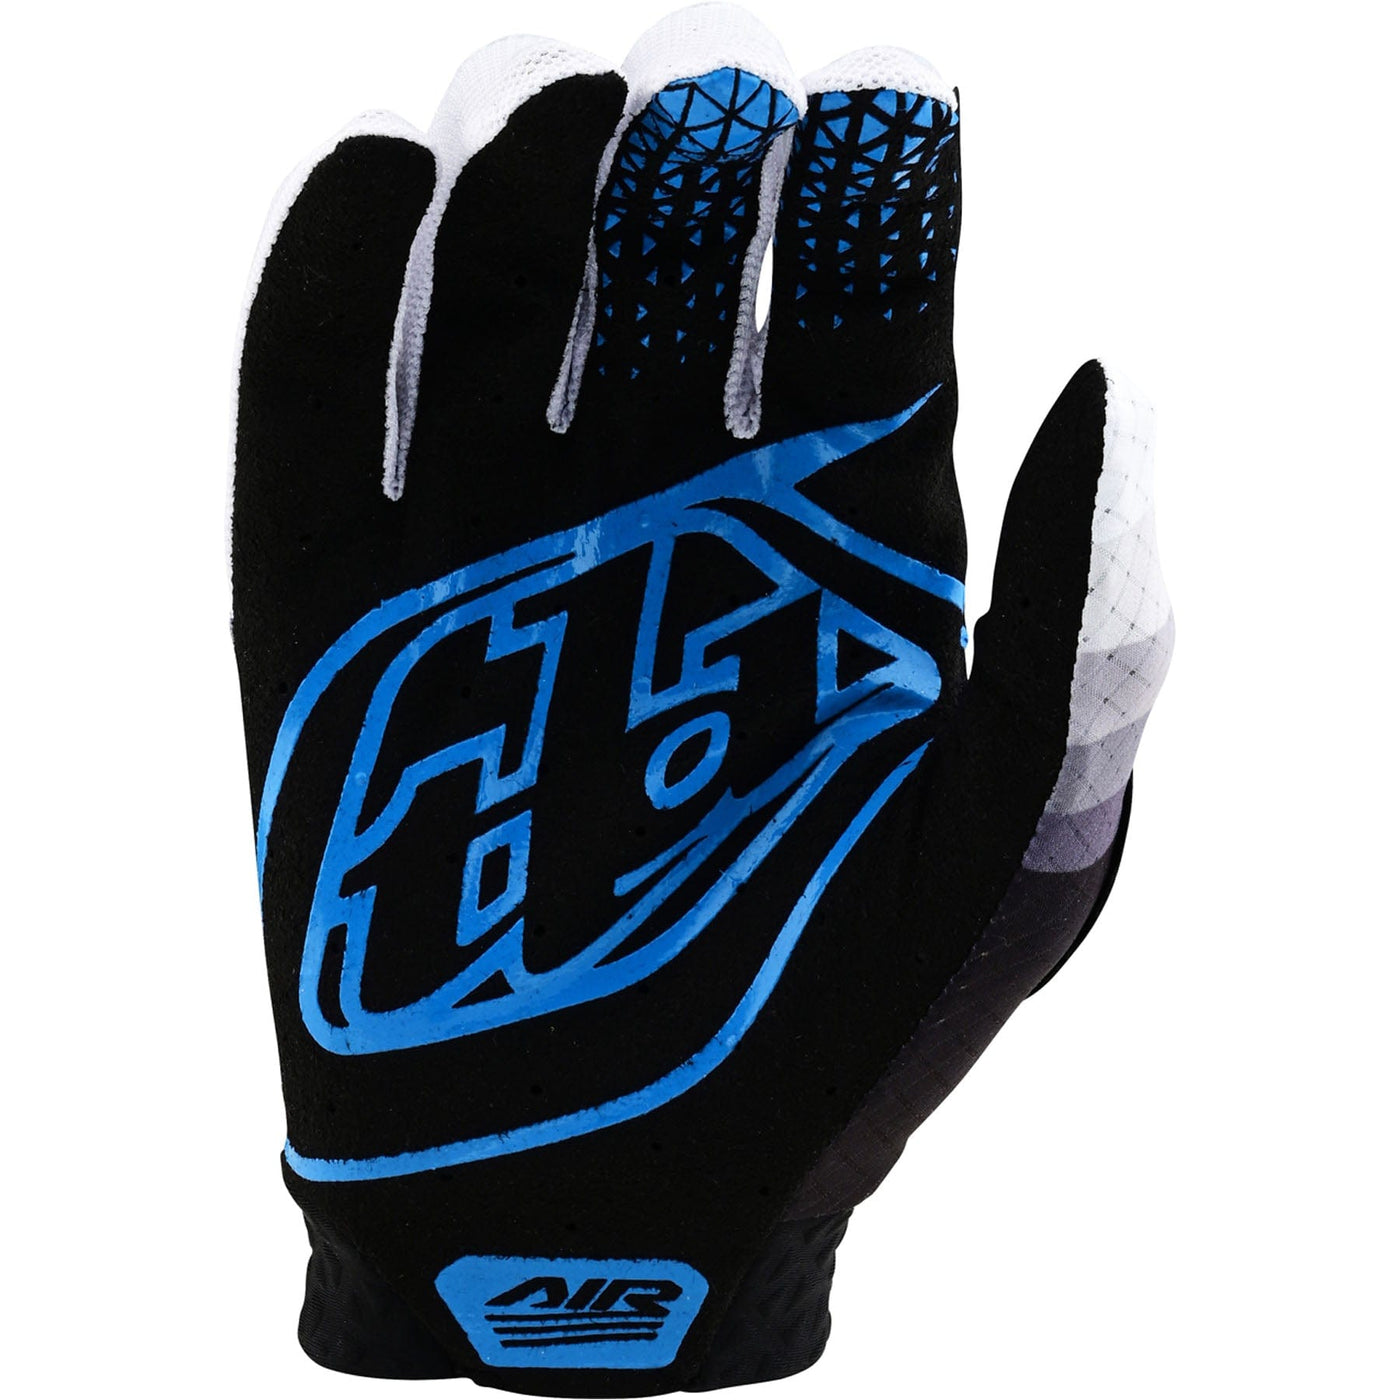 Troy Lee Designs Gloves AIR Reverb - Black/Blue 8Lines Shop - Fast Shipping